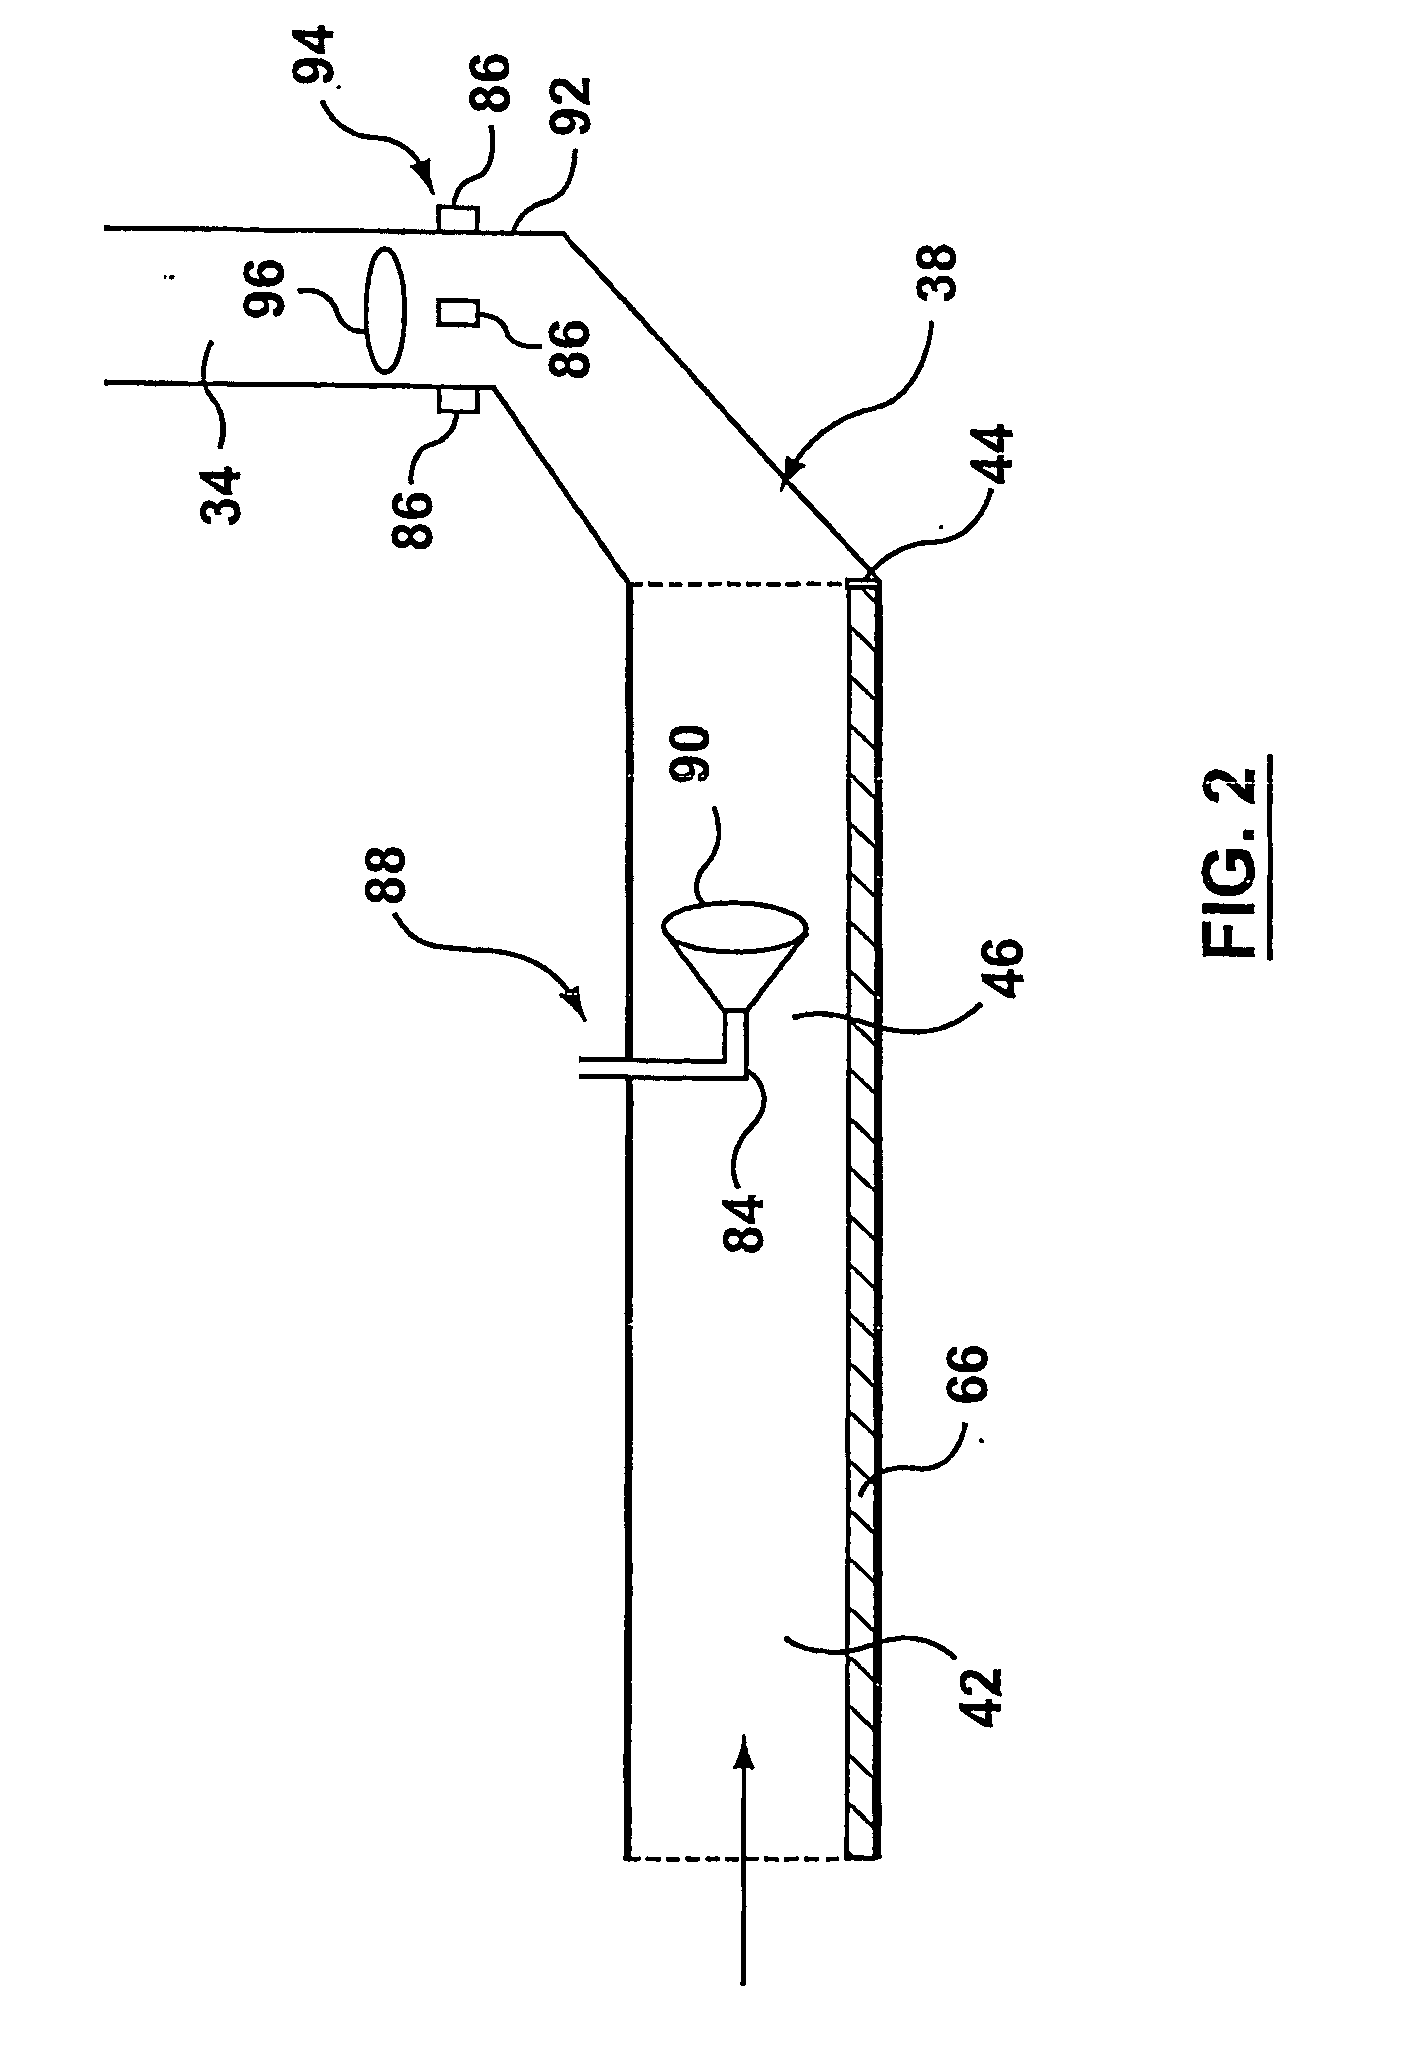 Method and system for process gas entrainment and mixing in a kiln system